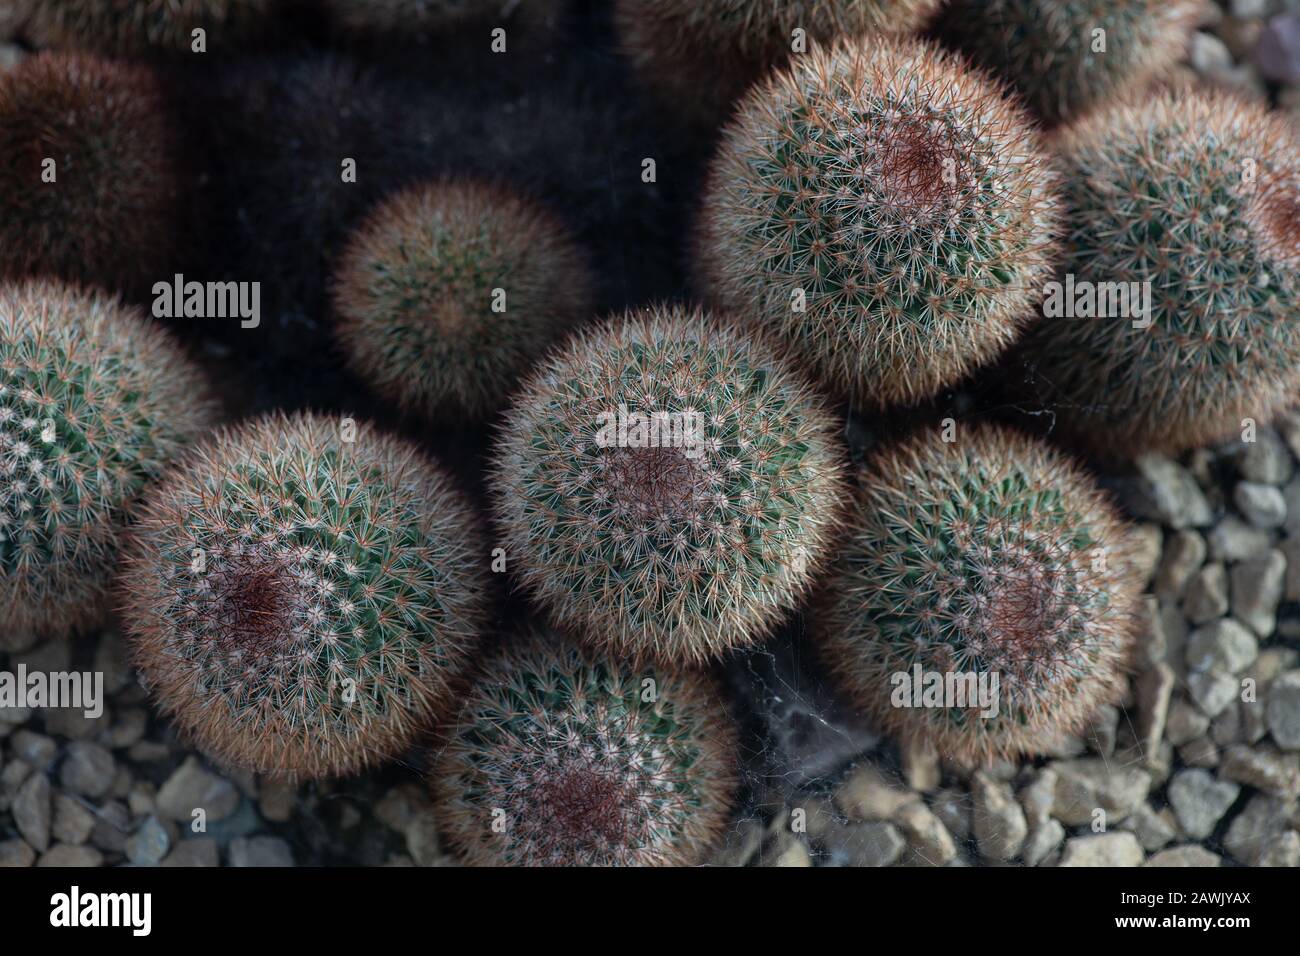 Mammillaria spinosissima, also known as the spiny pincushion cactus, endemic to central Mexico Stock Photo